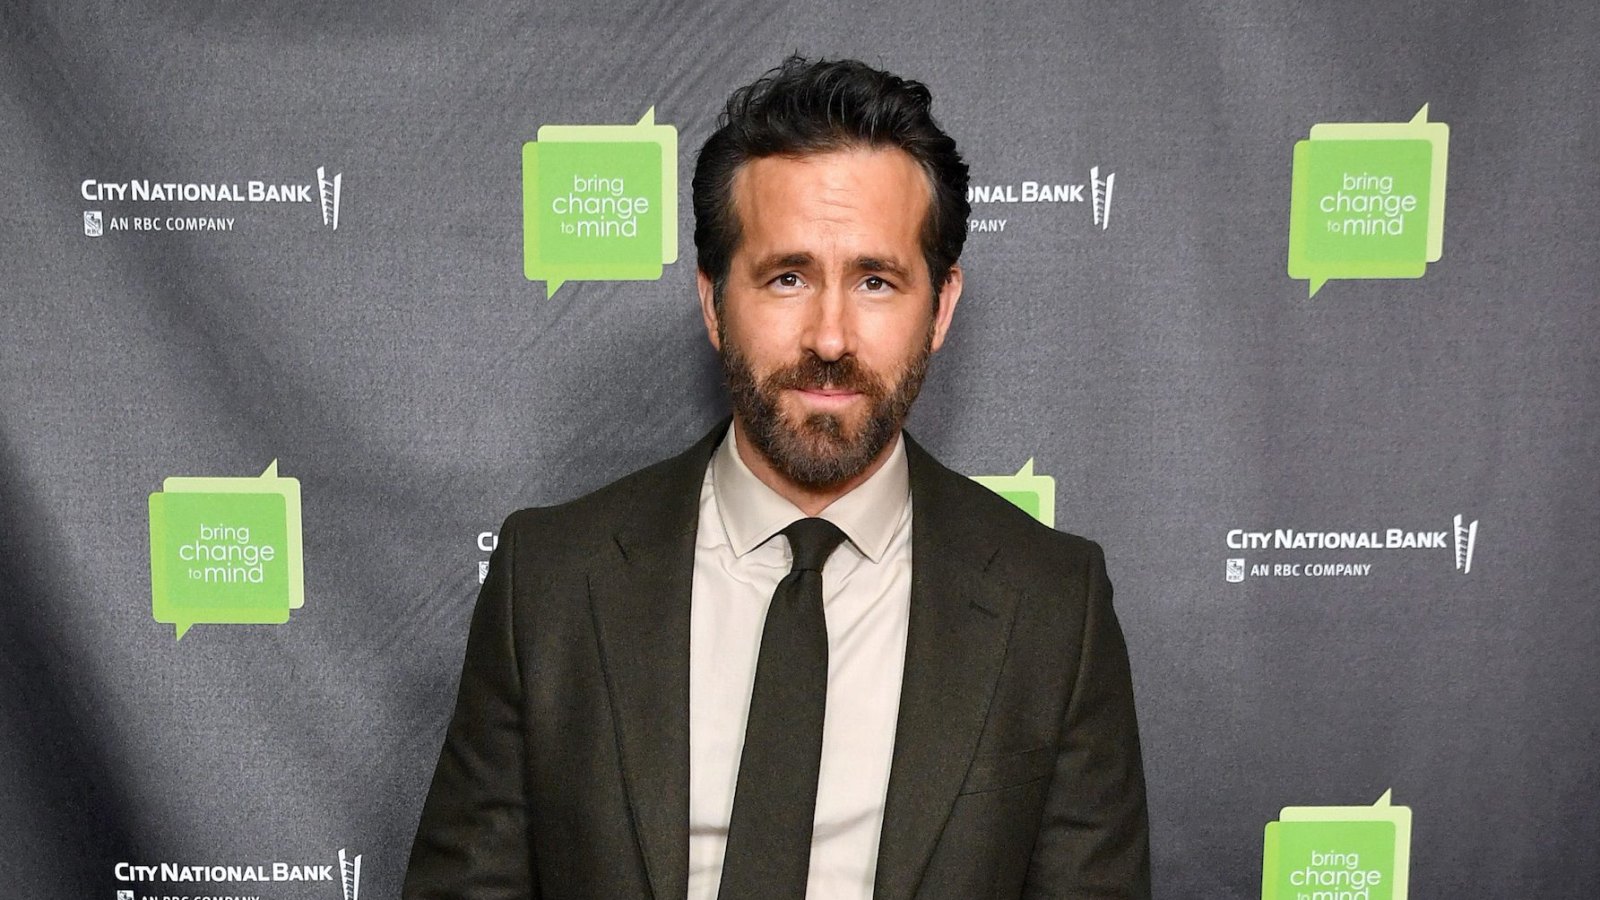 https://www.usmagazine.com/wp-content/uploads/2023/10/Ryan-Reynolds-Admits-Hes-Not-Always-Great-About-Taking-Care-of-His-Mental-Health-e1696970962642.jpg?crop=0px%2C88px%2C1785px%2C1008px&resize=1600%2C900&quality=86&strip=all